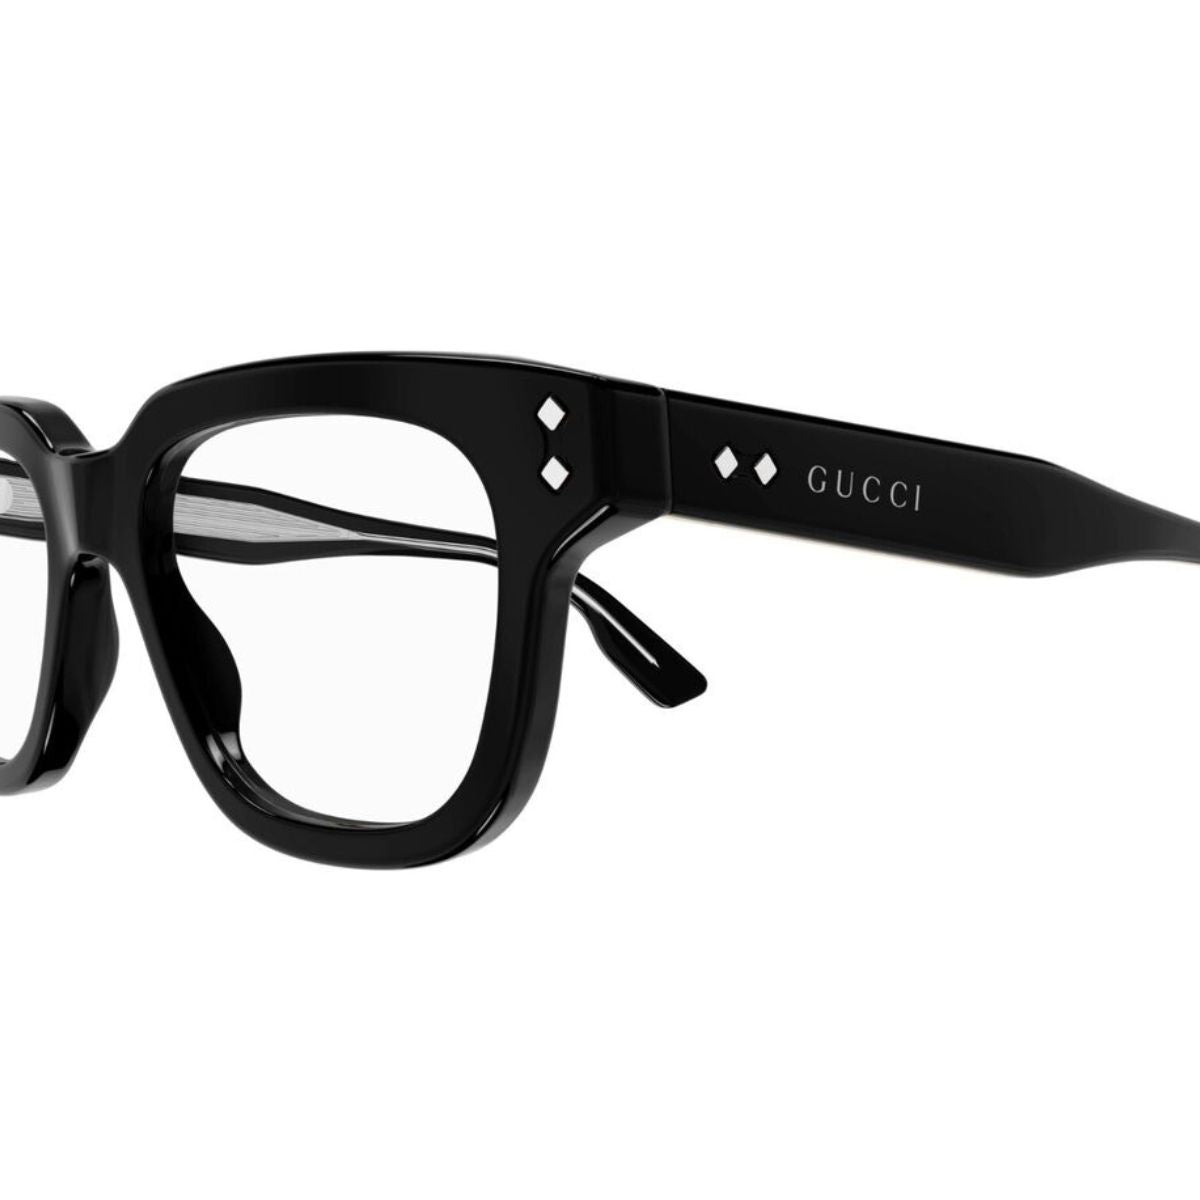 "Gucci 1219O 001 online glasses frame for men and women at optorium"